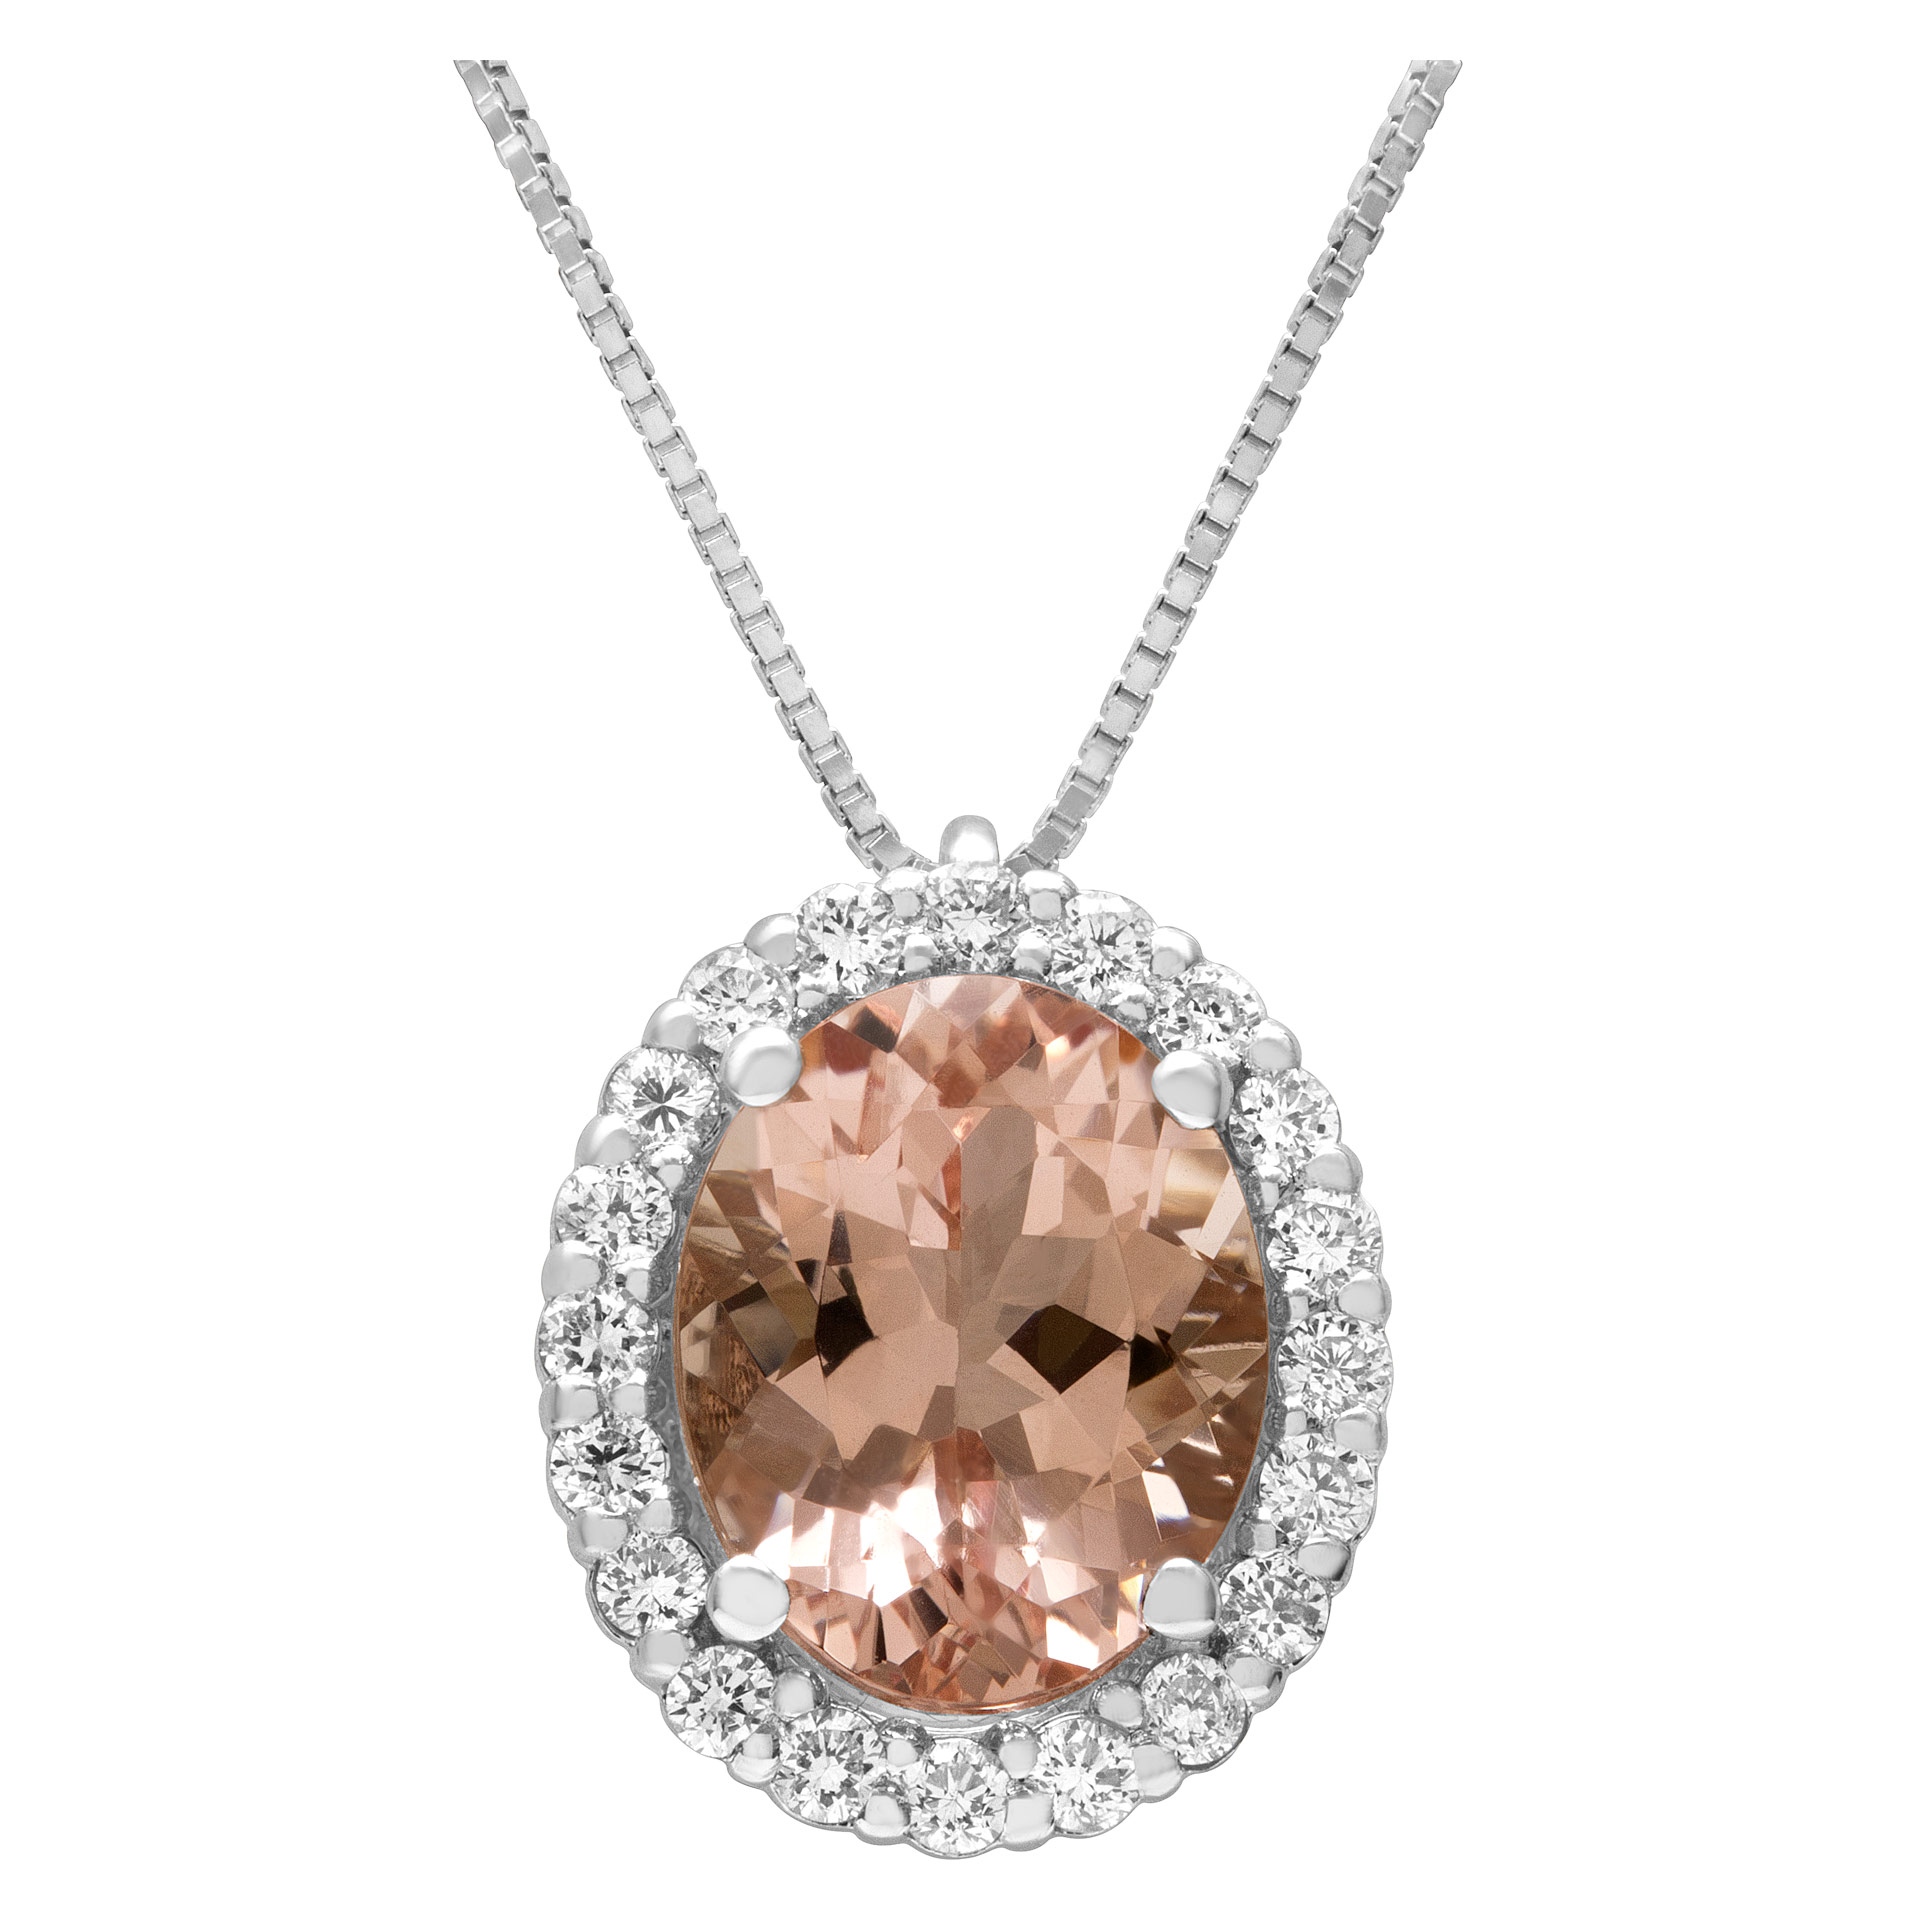 Morganite pendant with diamond accents 0.30 cts in diamonds in 18k white gold image 1